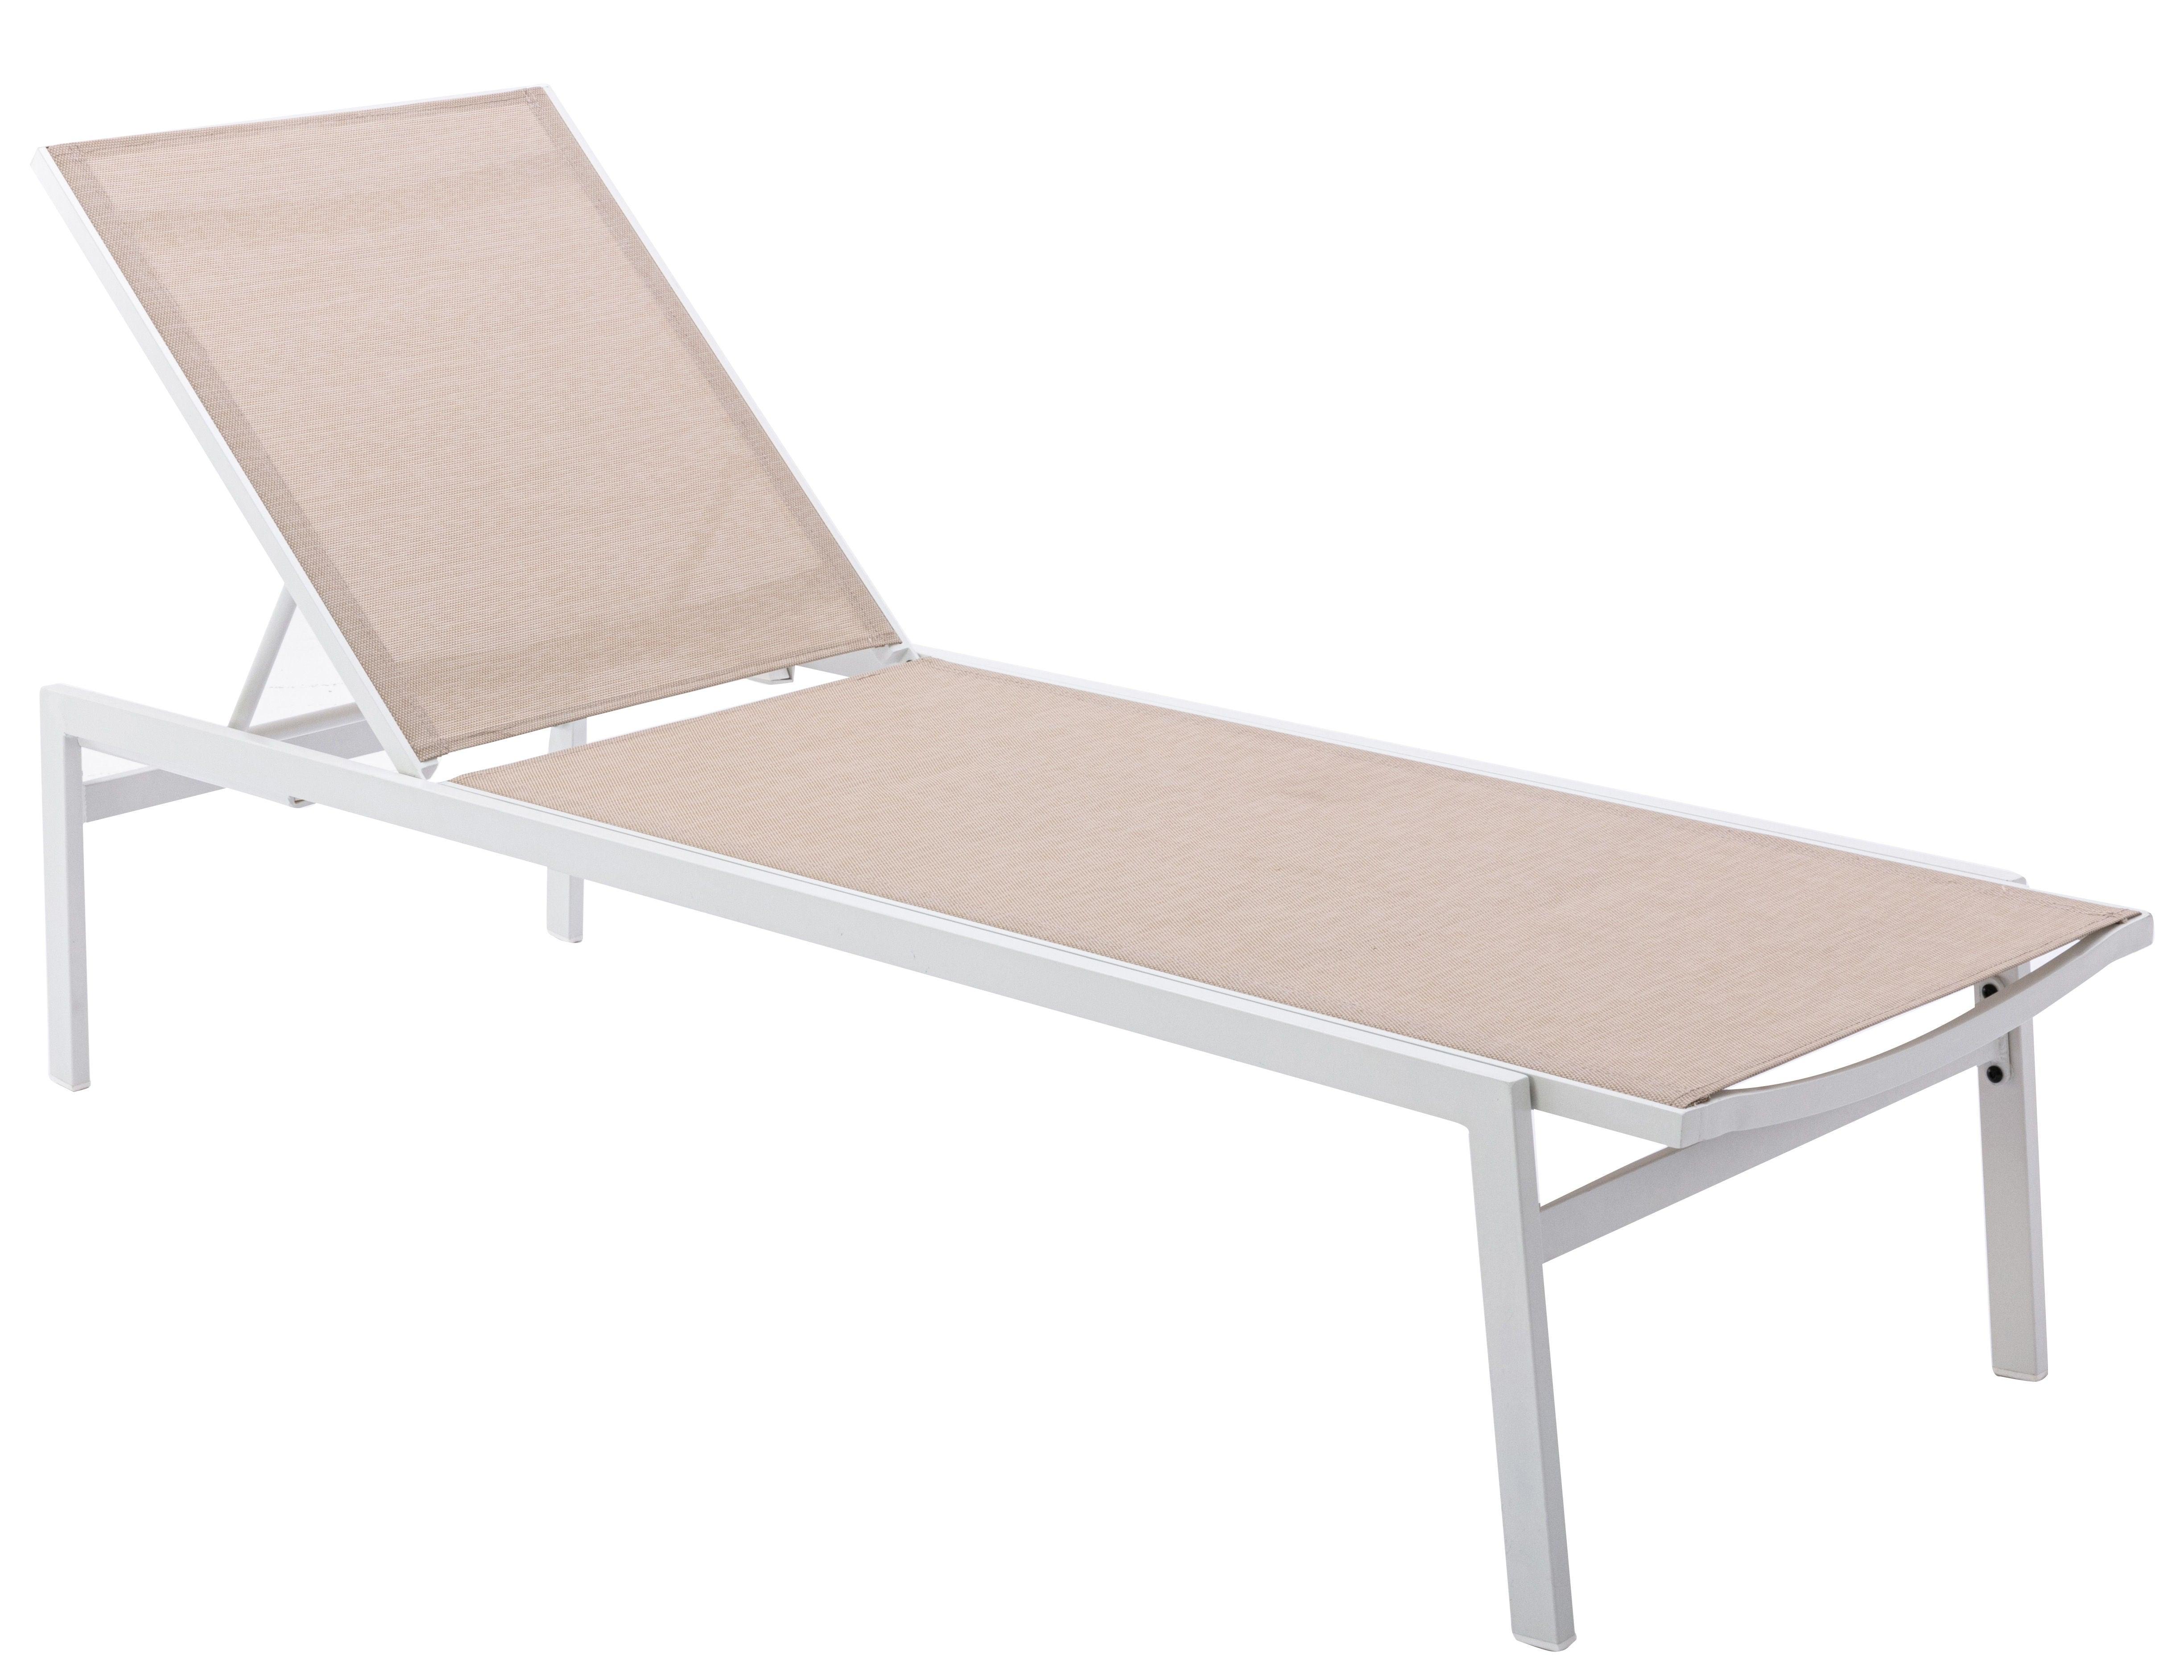 Meridian Furniture - Santorini - Outdoor Patio Chaise Lounge Chair with Chrome Base - 5th Avenue Furniture